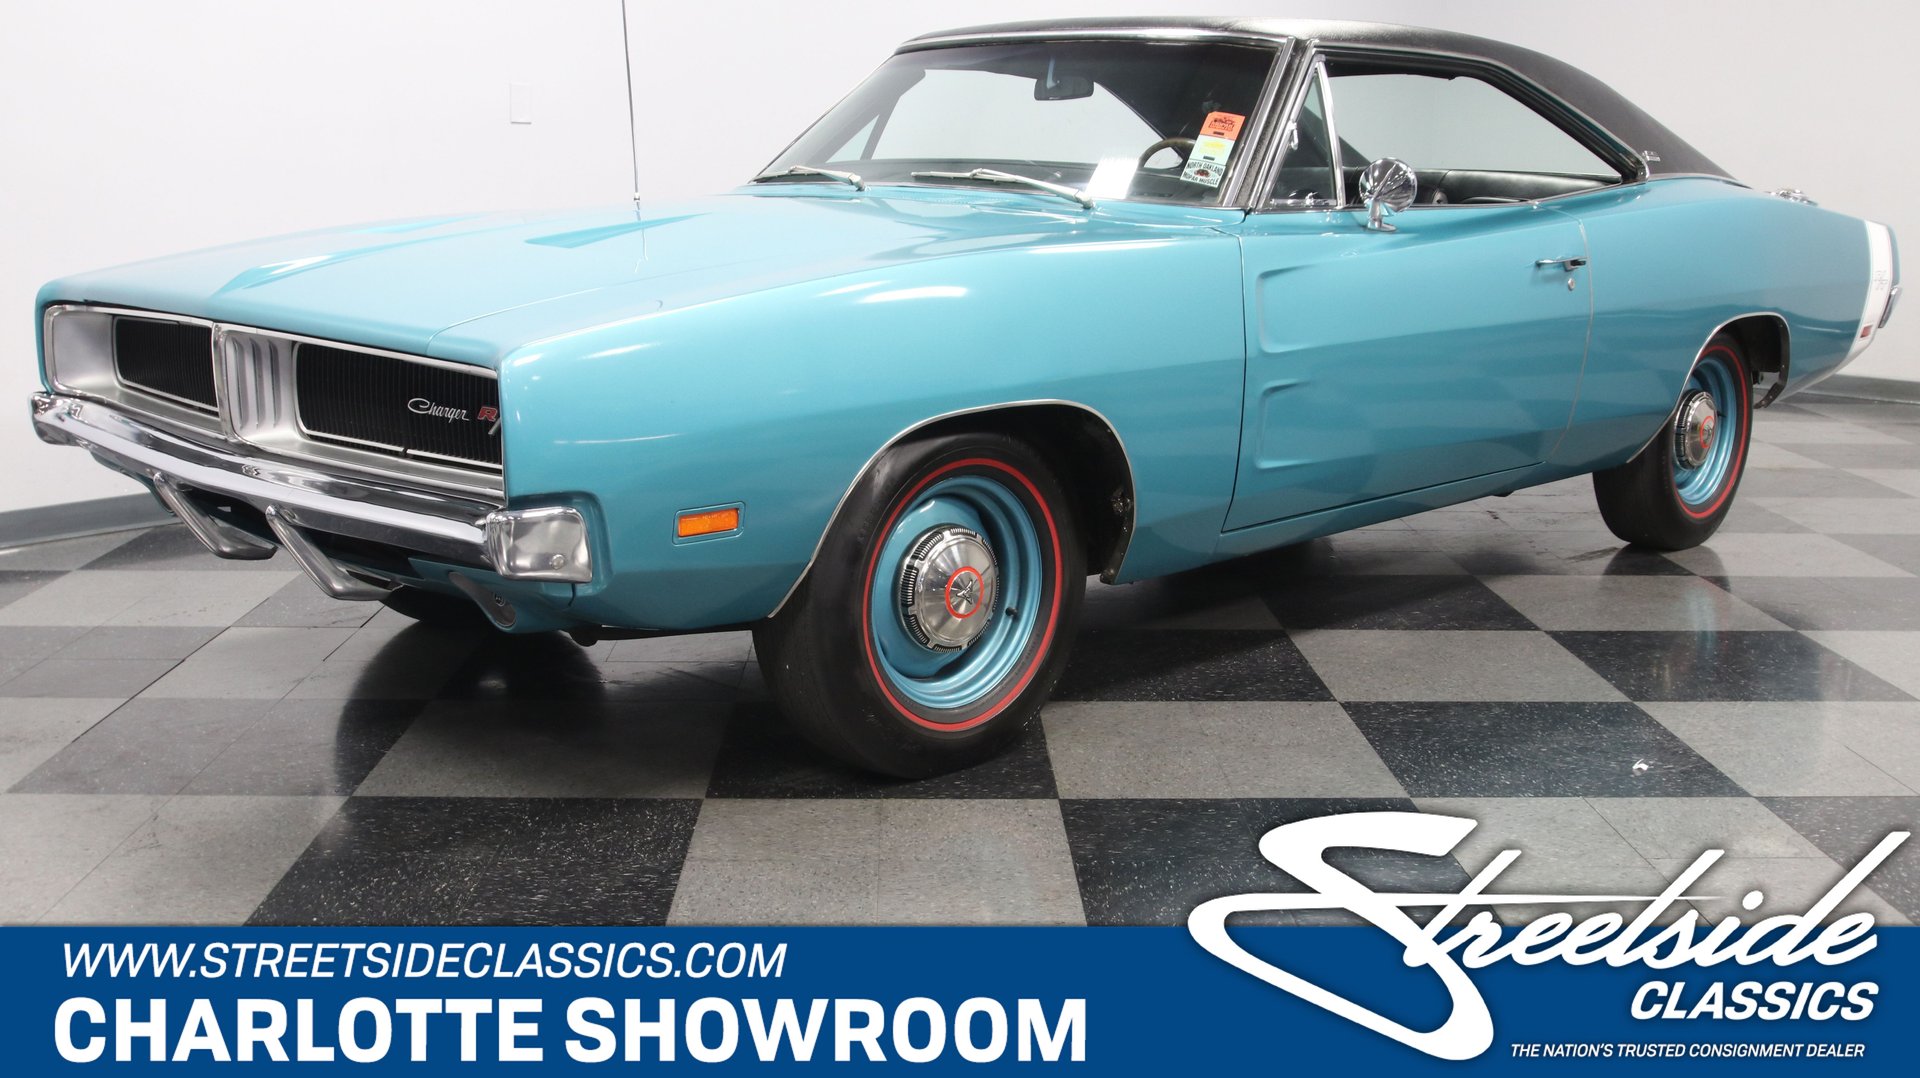 1969 Dodge Charger | Classic Cars for Sale - Streetside Classics